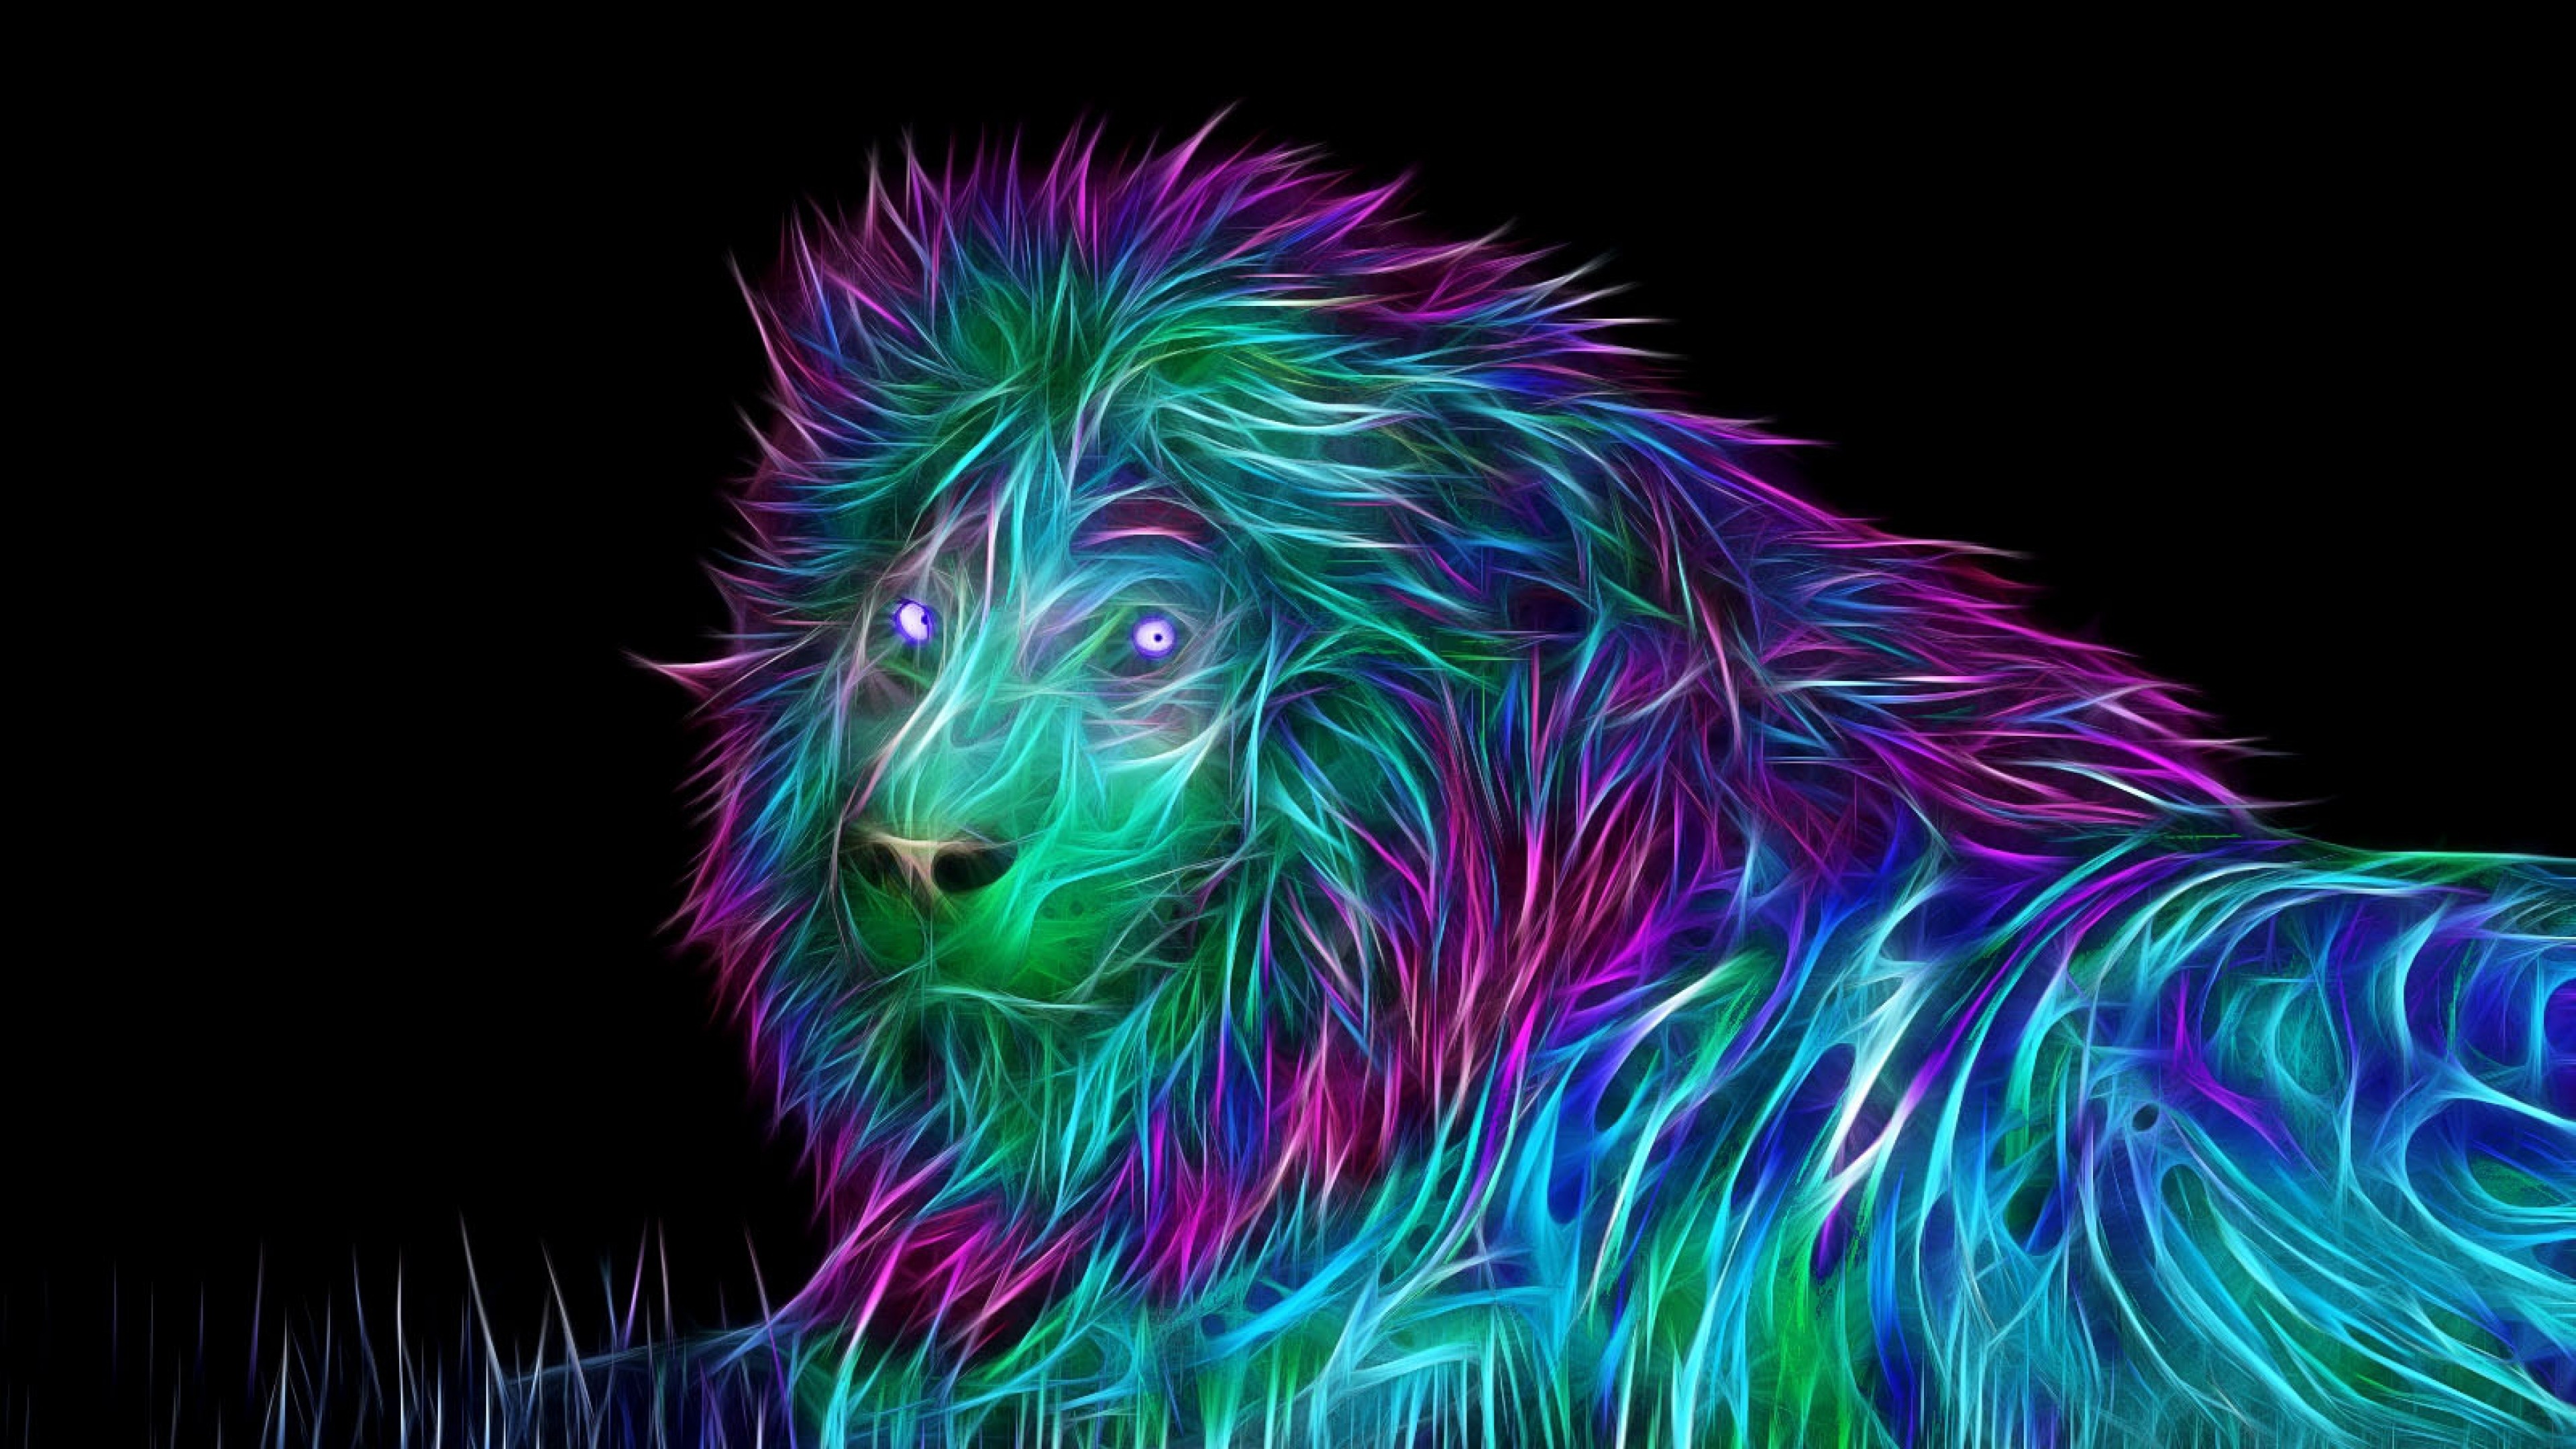 3840x2160 An Abstract Fractal Lion Background DOWNLOAD in FULL QUALITY at http:// wallpaper.